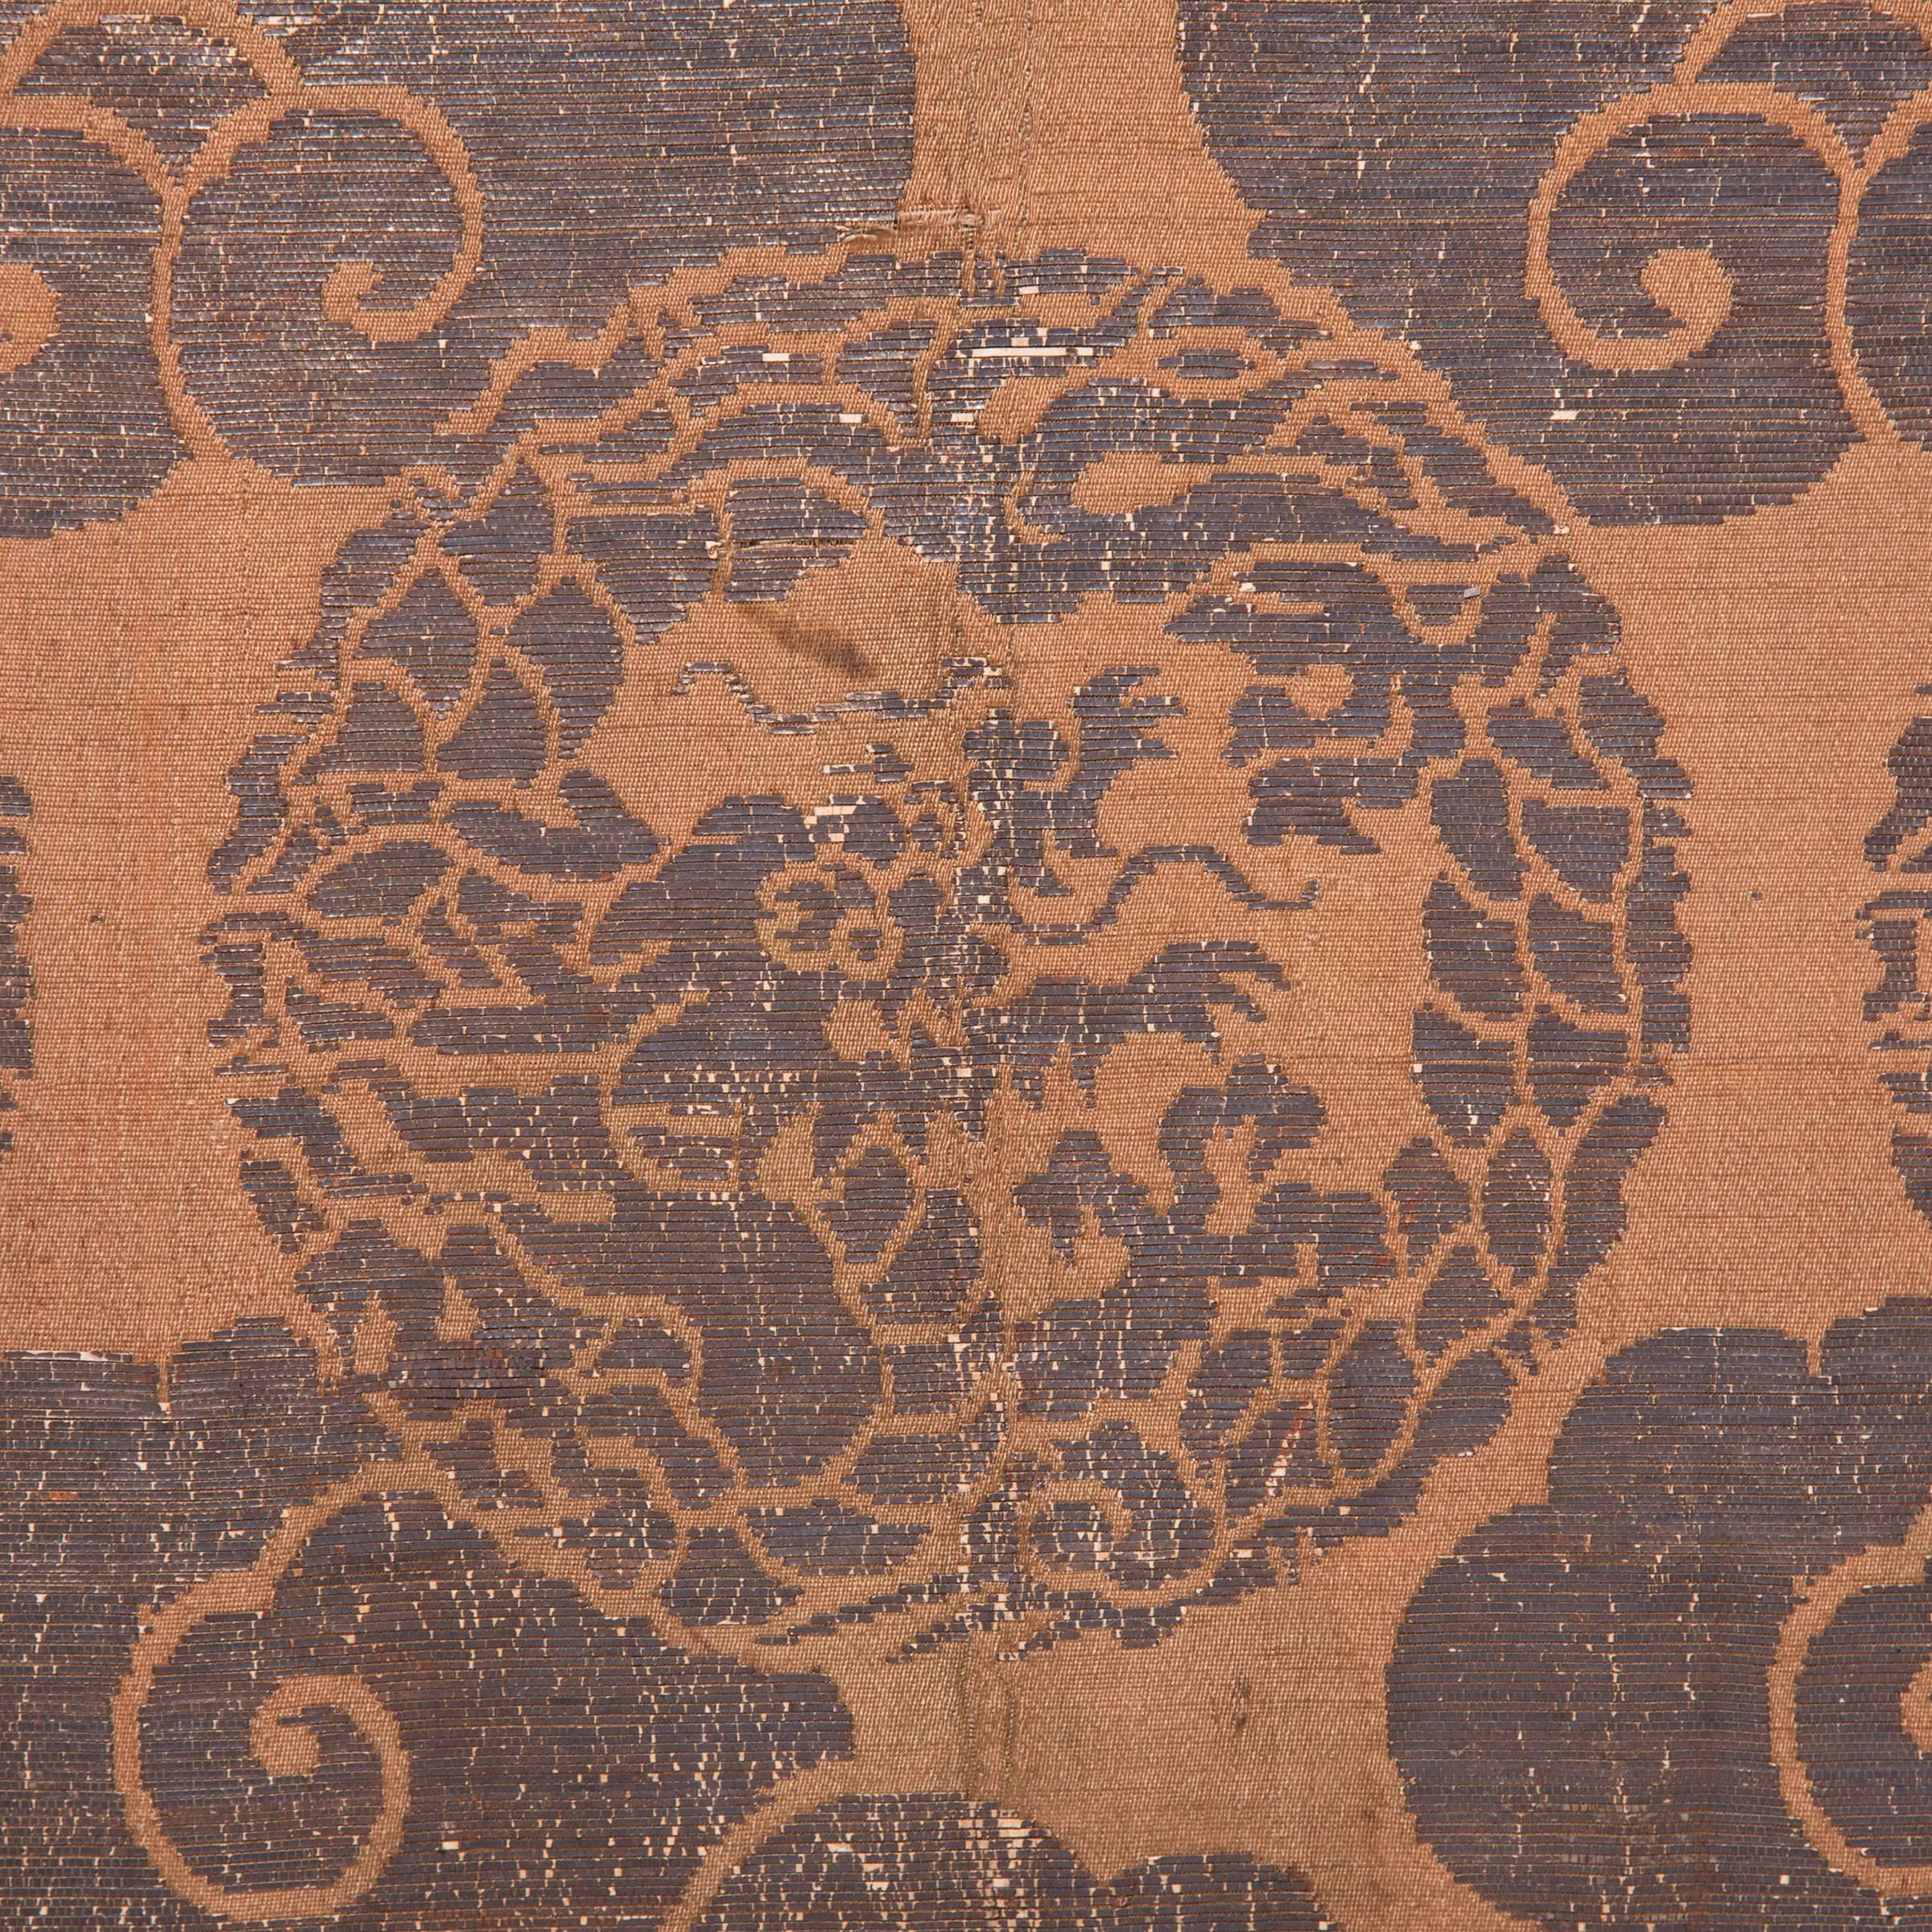 Ming dynasty textiles are extremely rare because the delicate silks and brocades wear away with time. This beautiful gold and black textile has survived the past four hundred years, and even after all this time the yellow thread is still arrestingly